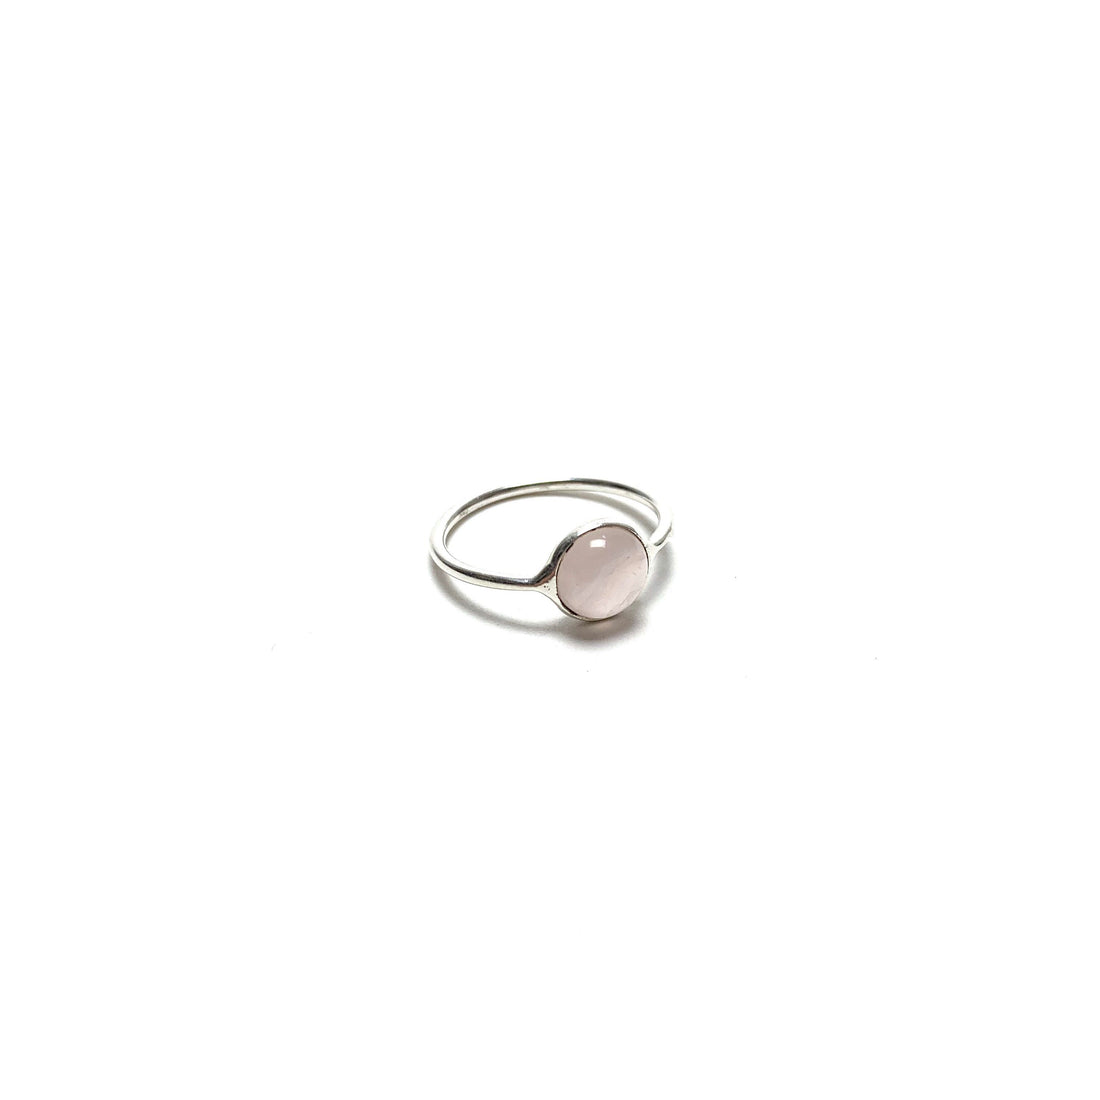 Rose Quartz Silver Ring Rings Crystals G. $18.00 Size 5 